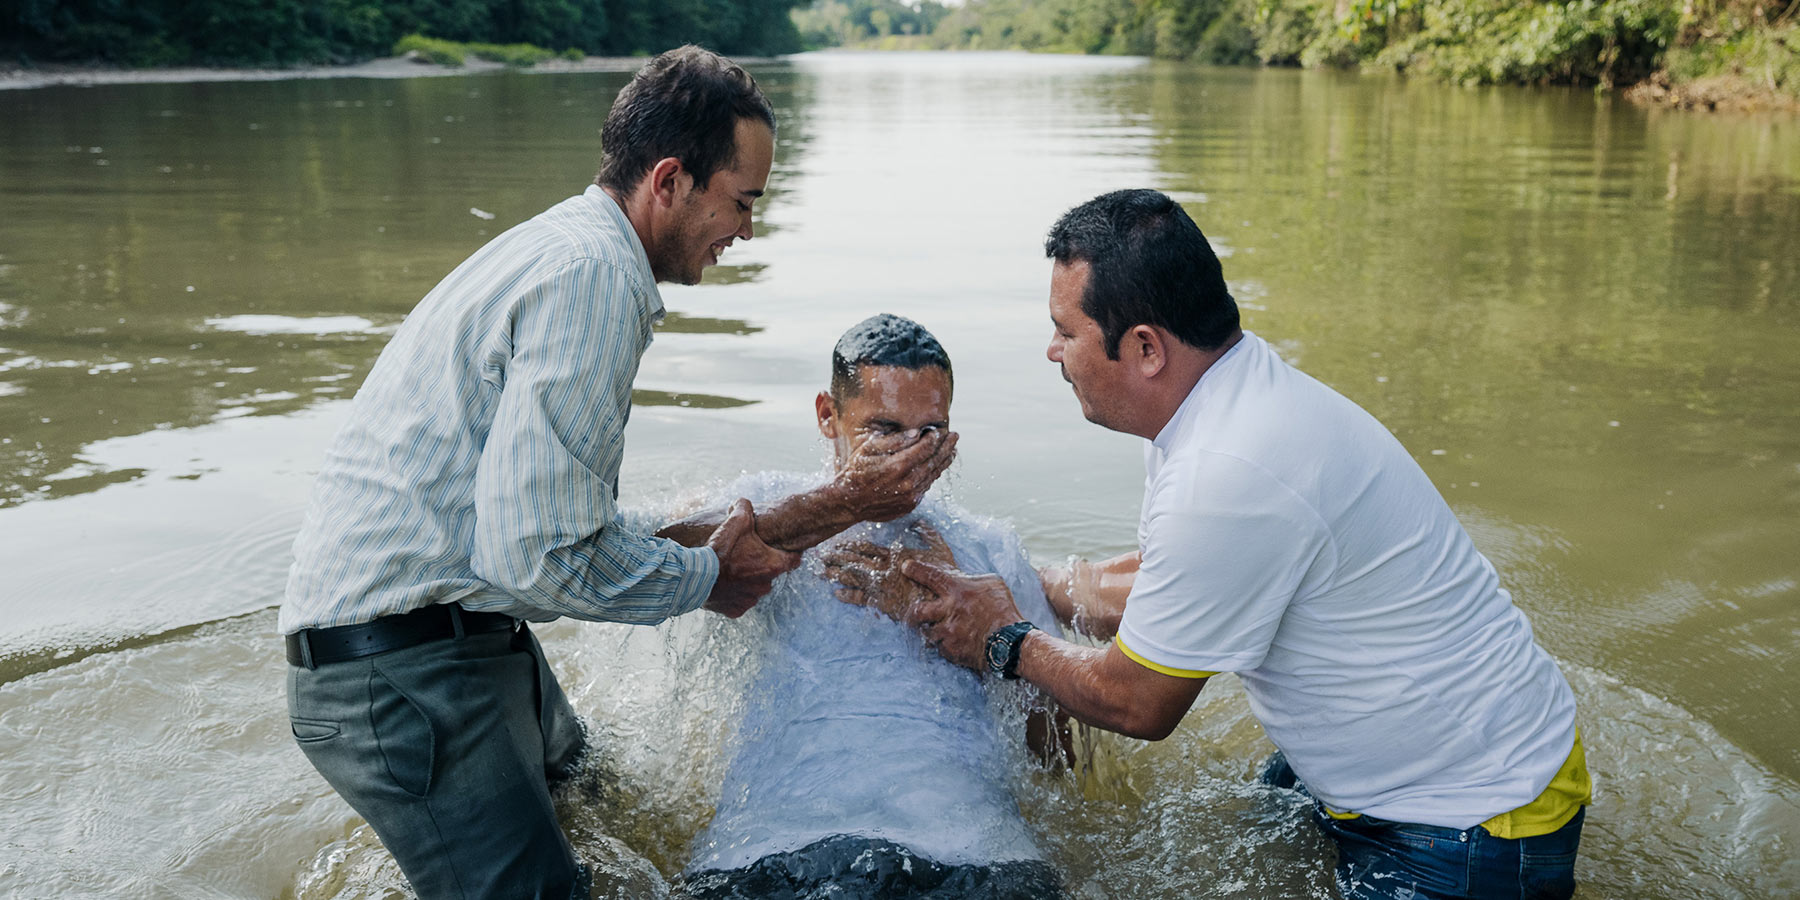 Person being baptized in a river.